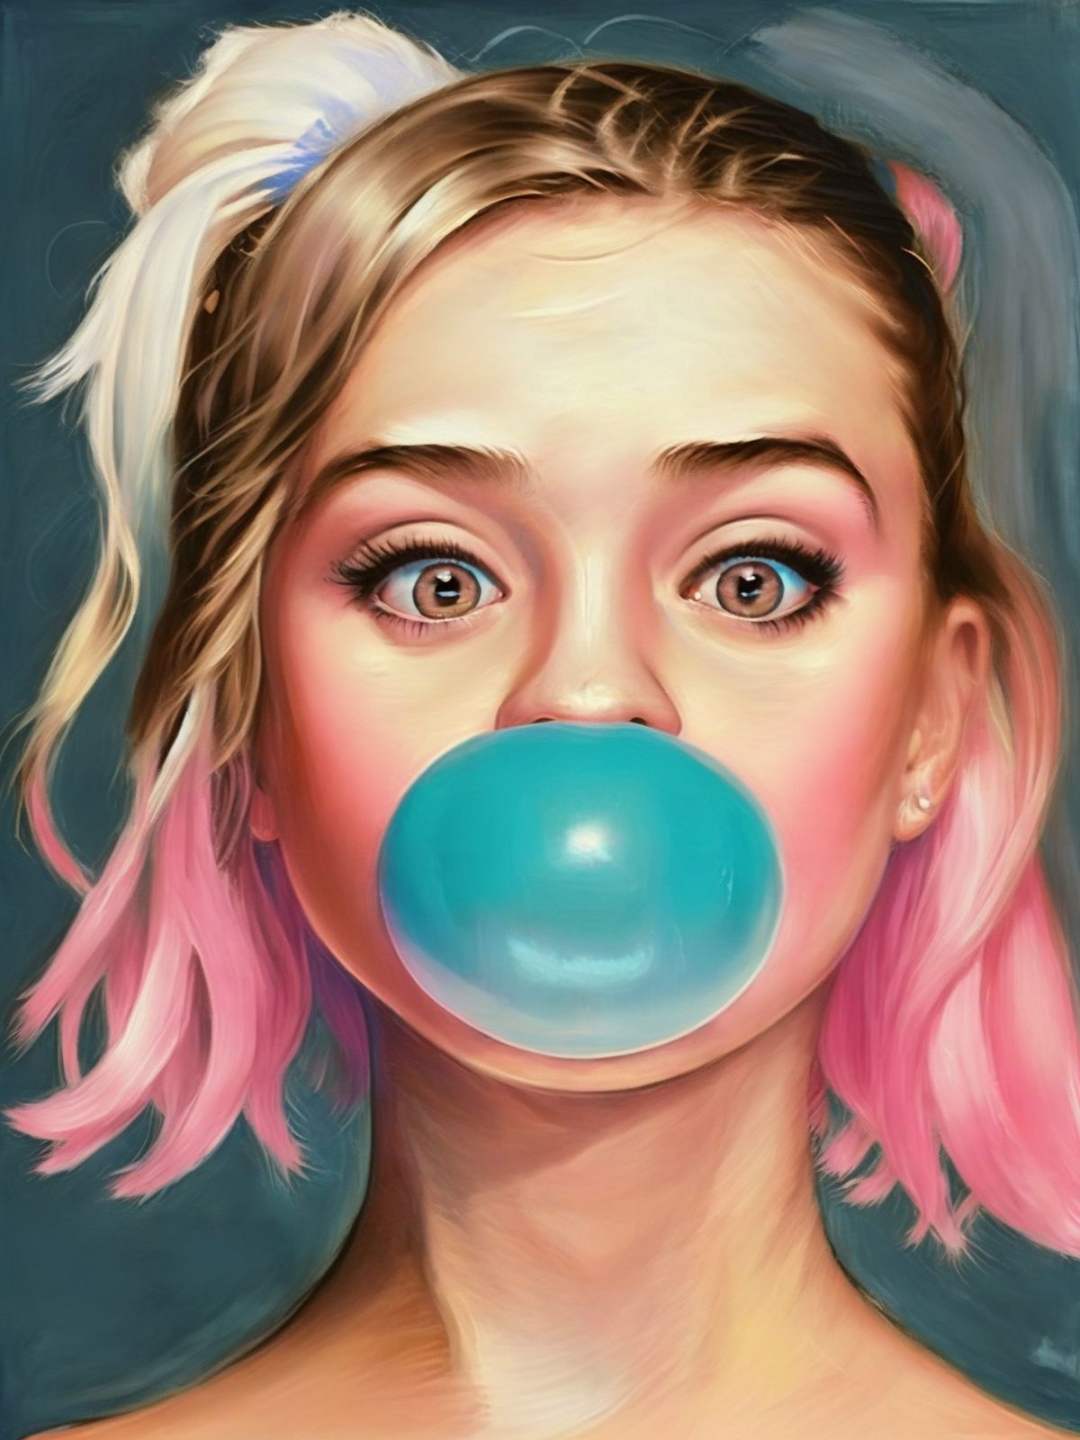 painting in the style, of a teenage girl with bare shoulders and her head turned , navy_blue tones and pale highlights. blowing bubble gum, pink bubble gum <lora:Bubble Gum:1>